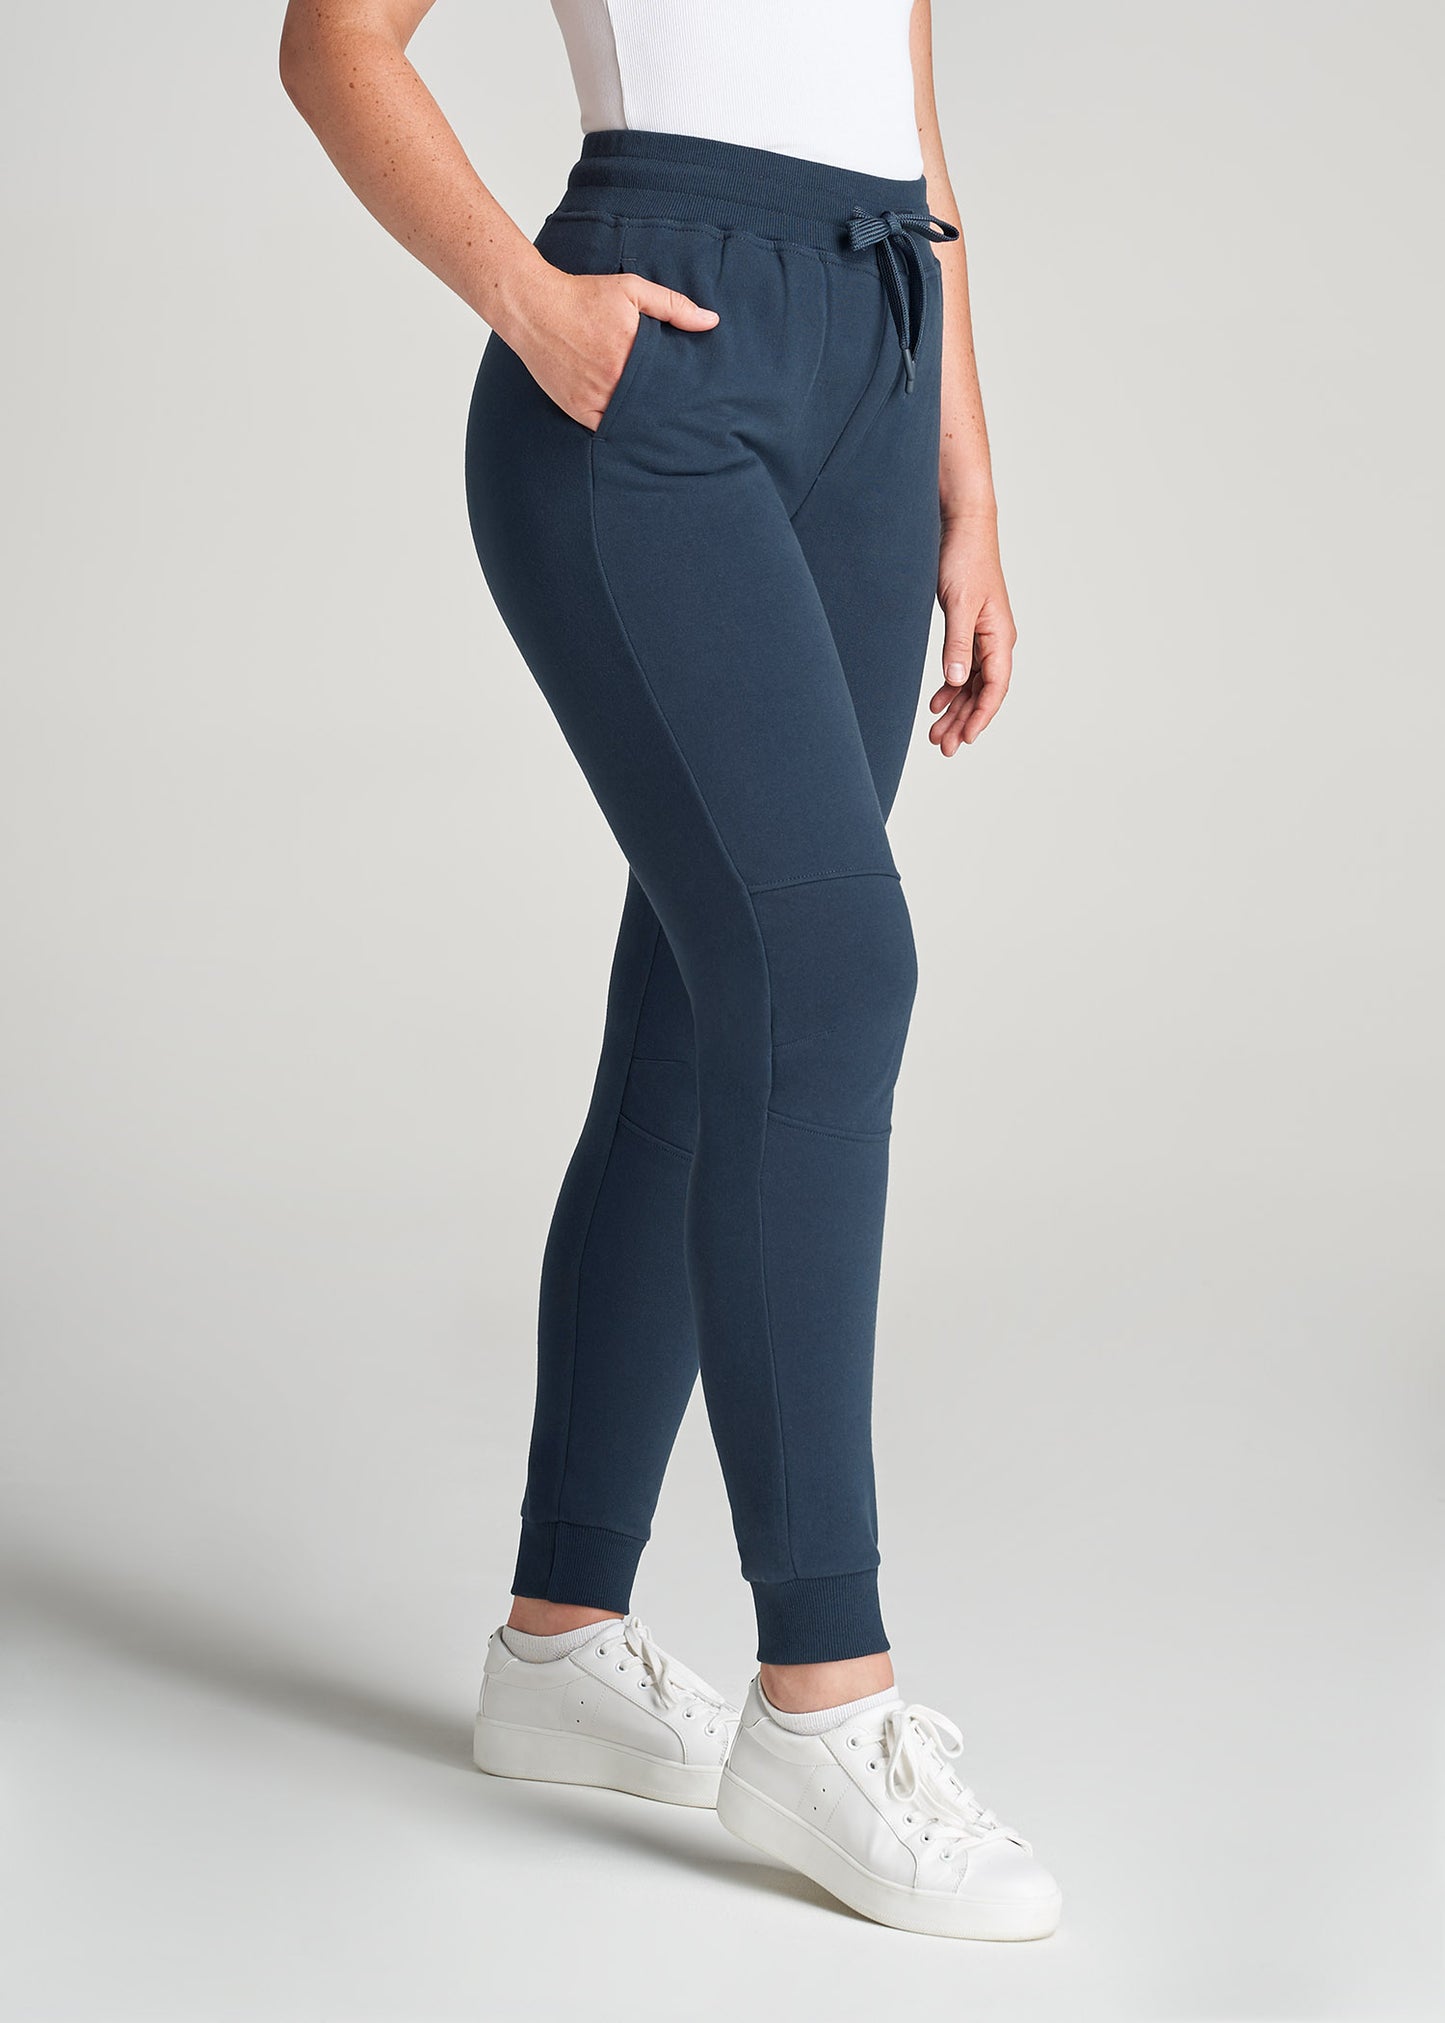 American-Tall-Women-Tall-FrenchTerry-Jogger-BrightNavy-side